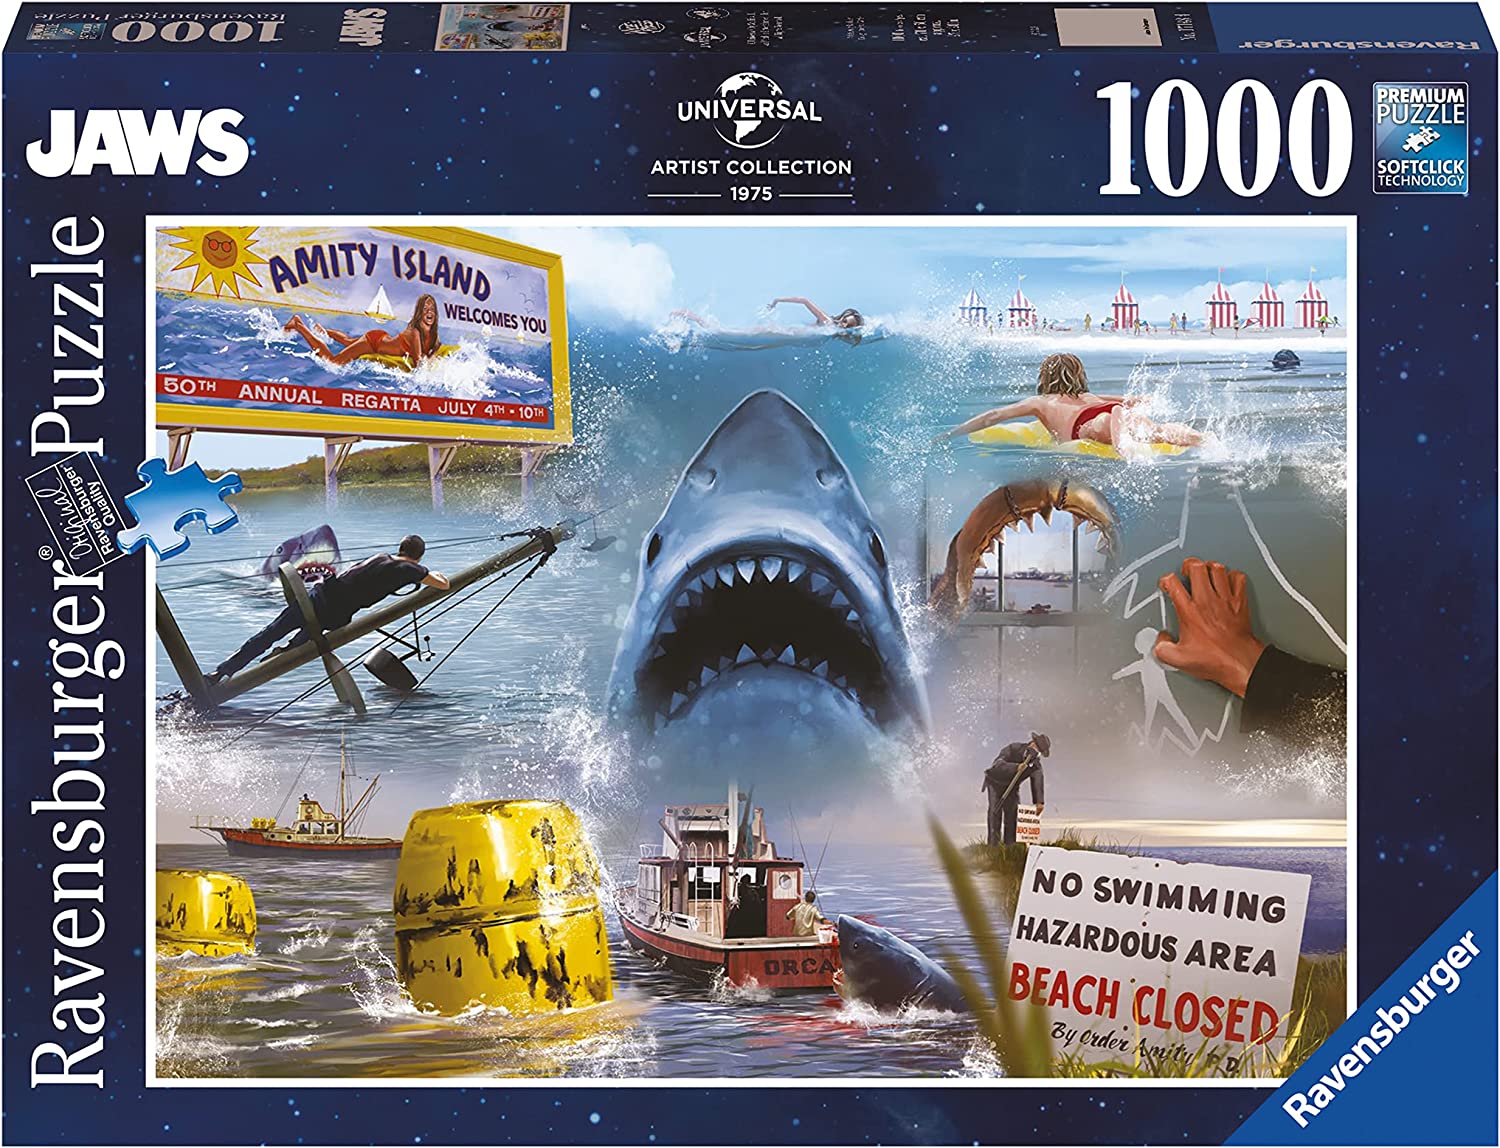 Ravensburger Universal Artist Collection Jaws 1000 Piece Puzzle